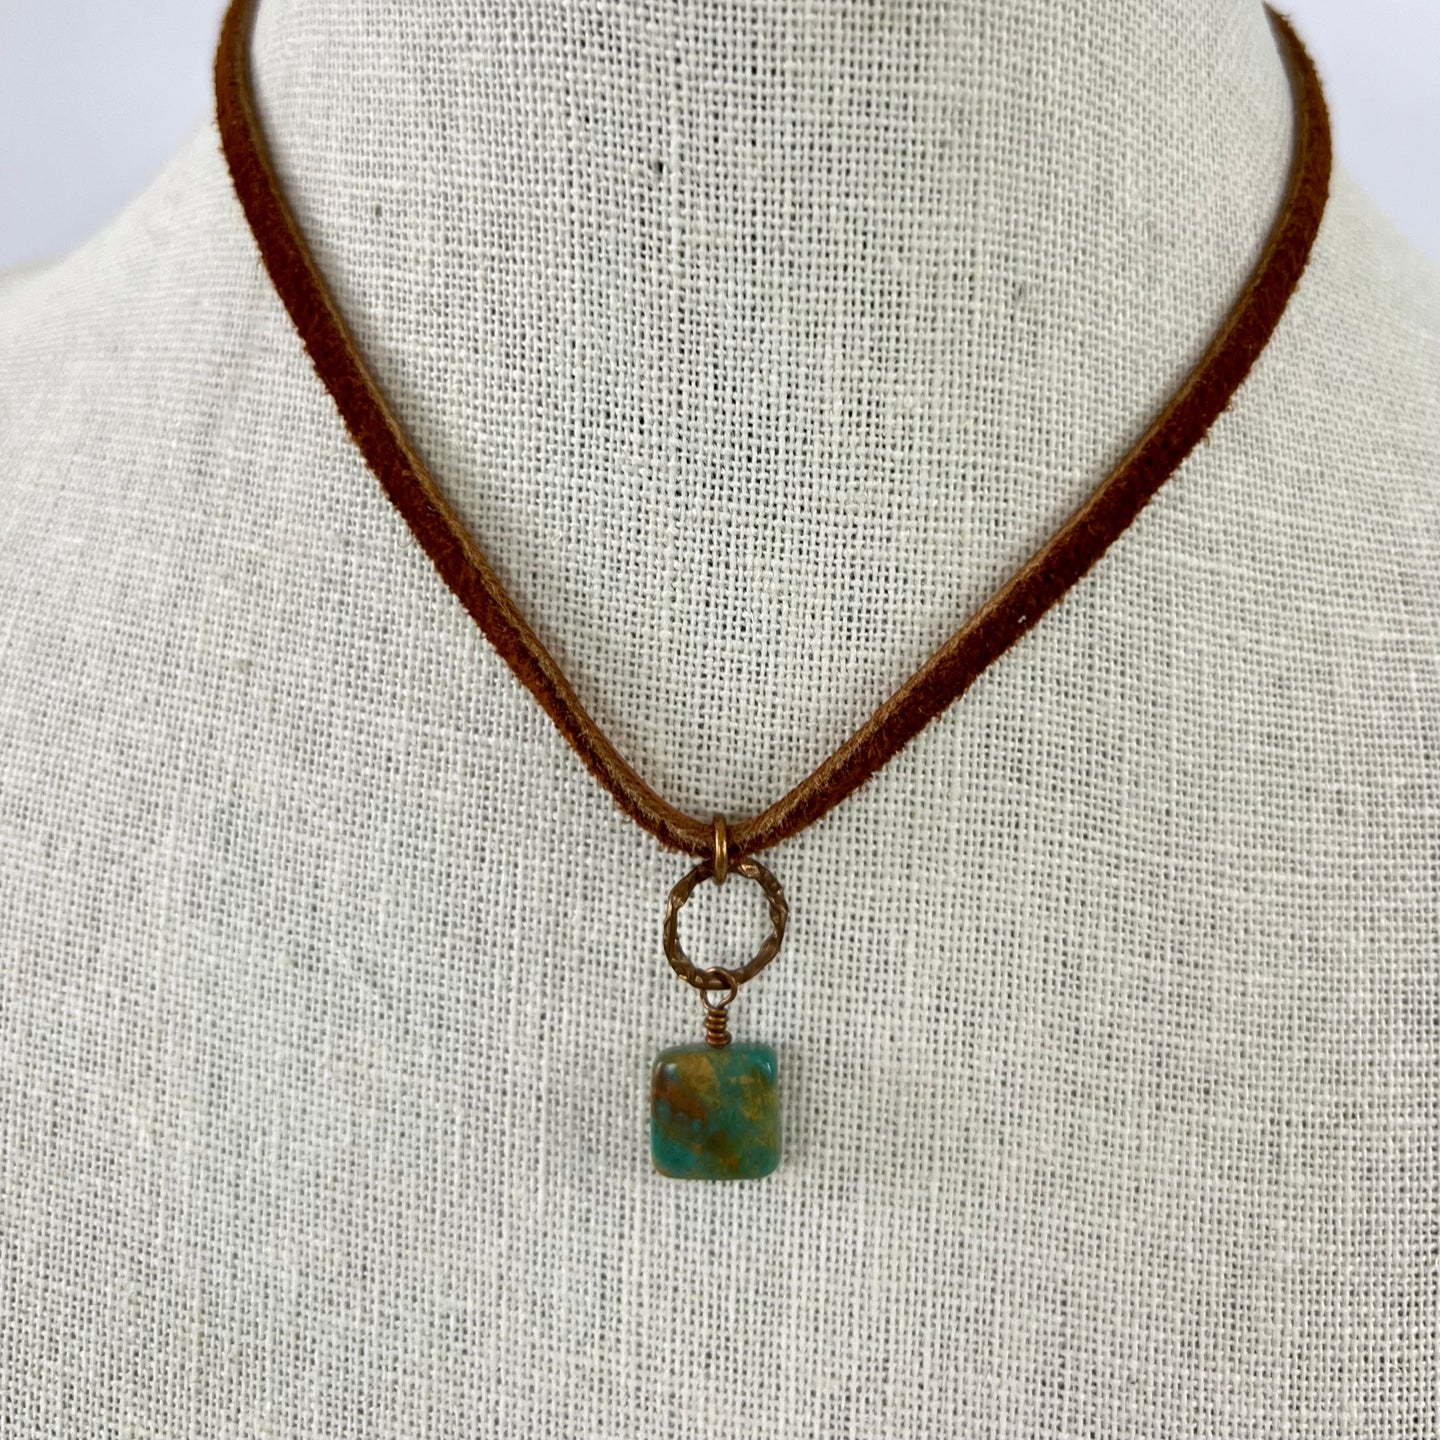 Vintage Leather Turquoise Necklace. 